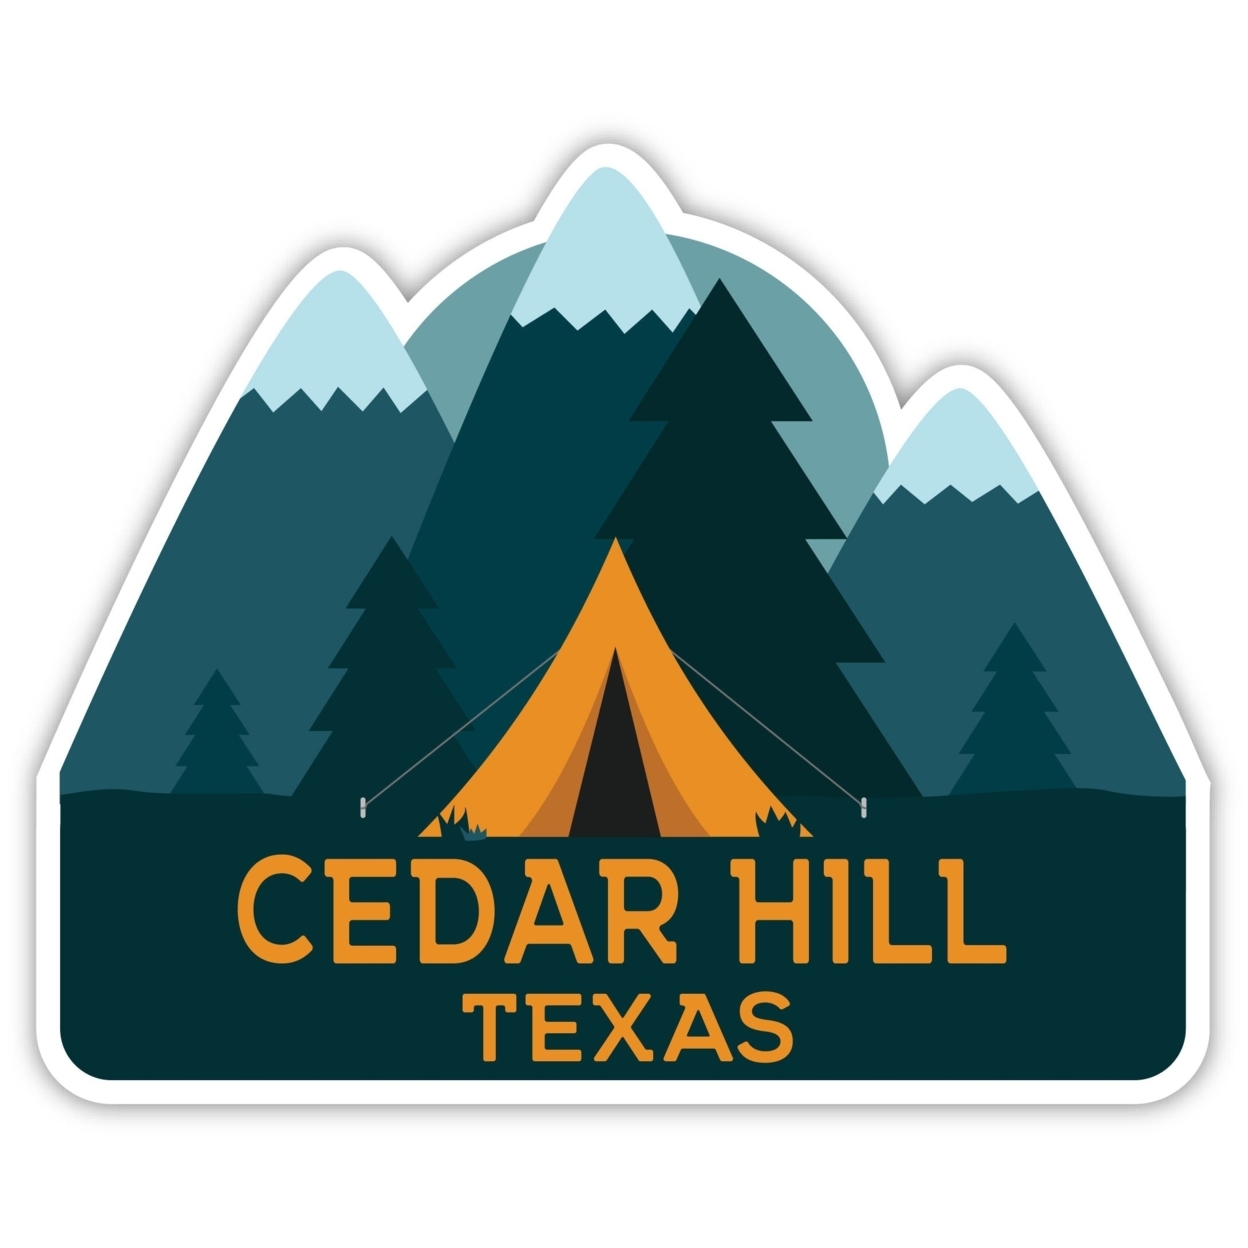 Cedar Hill Texas Souvenir Decorative Stickers (Choose Theme And Size) - 4-Pack, 6-Inch, Tent